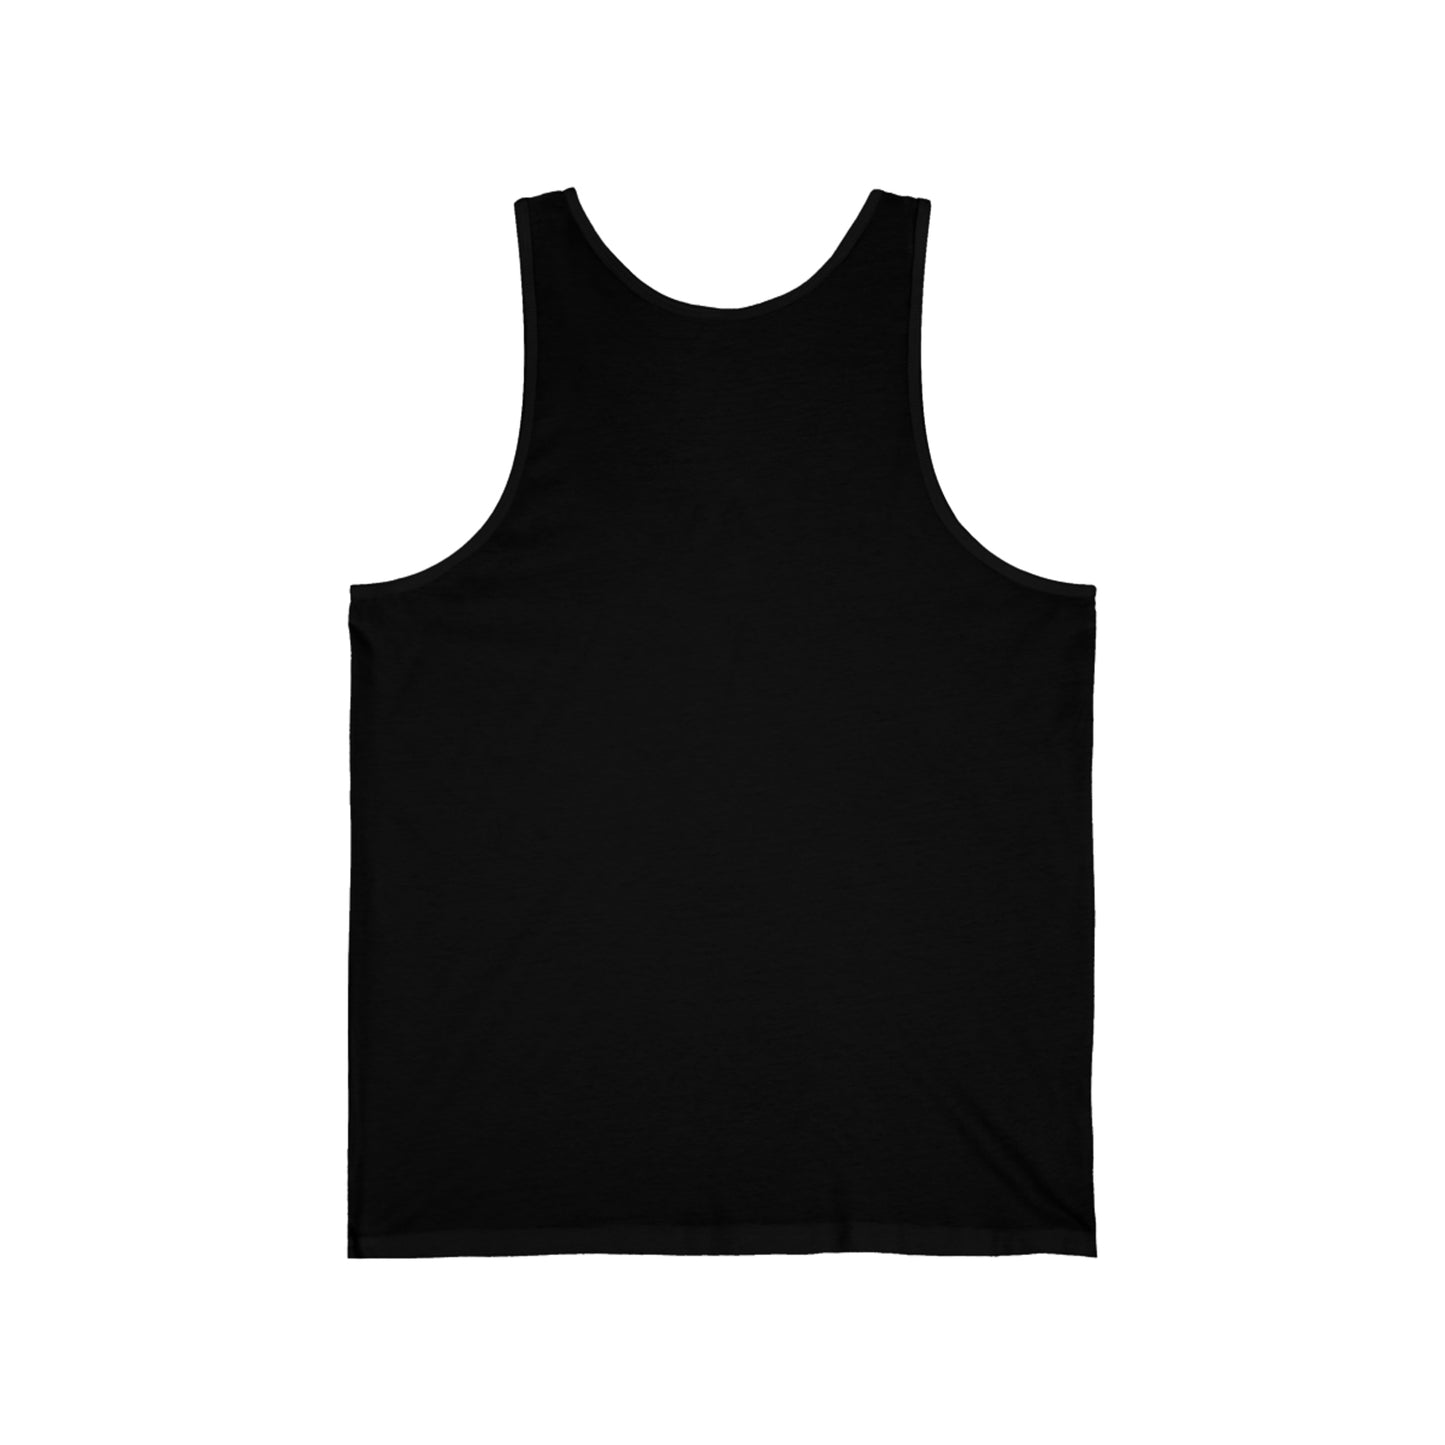 Palestinian Roots Design 2: Tank Top